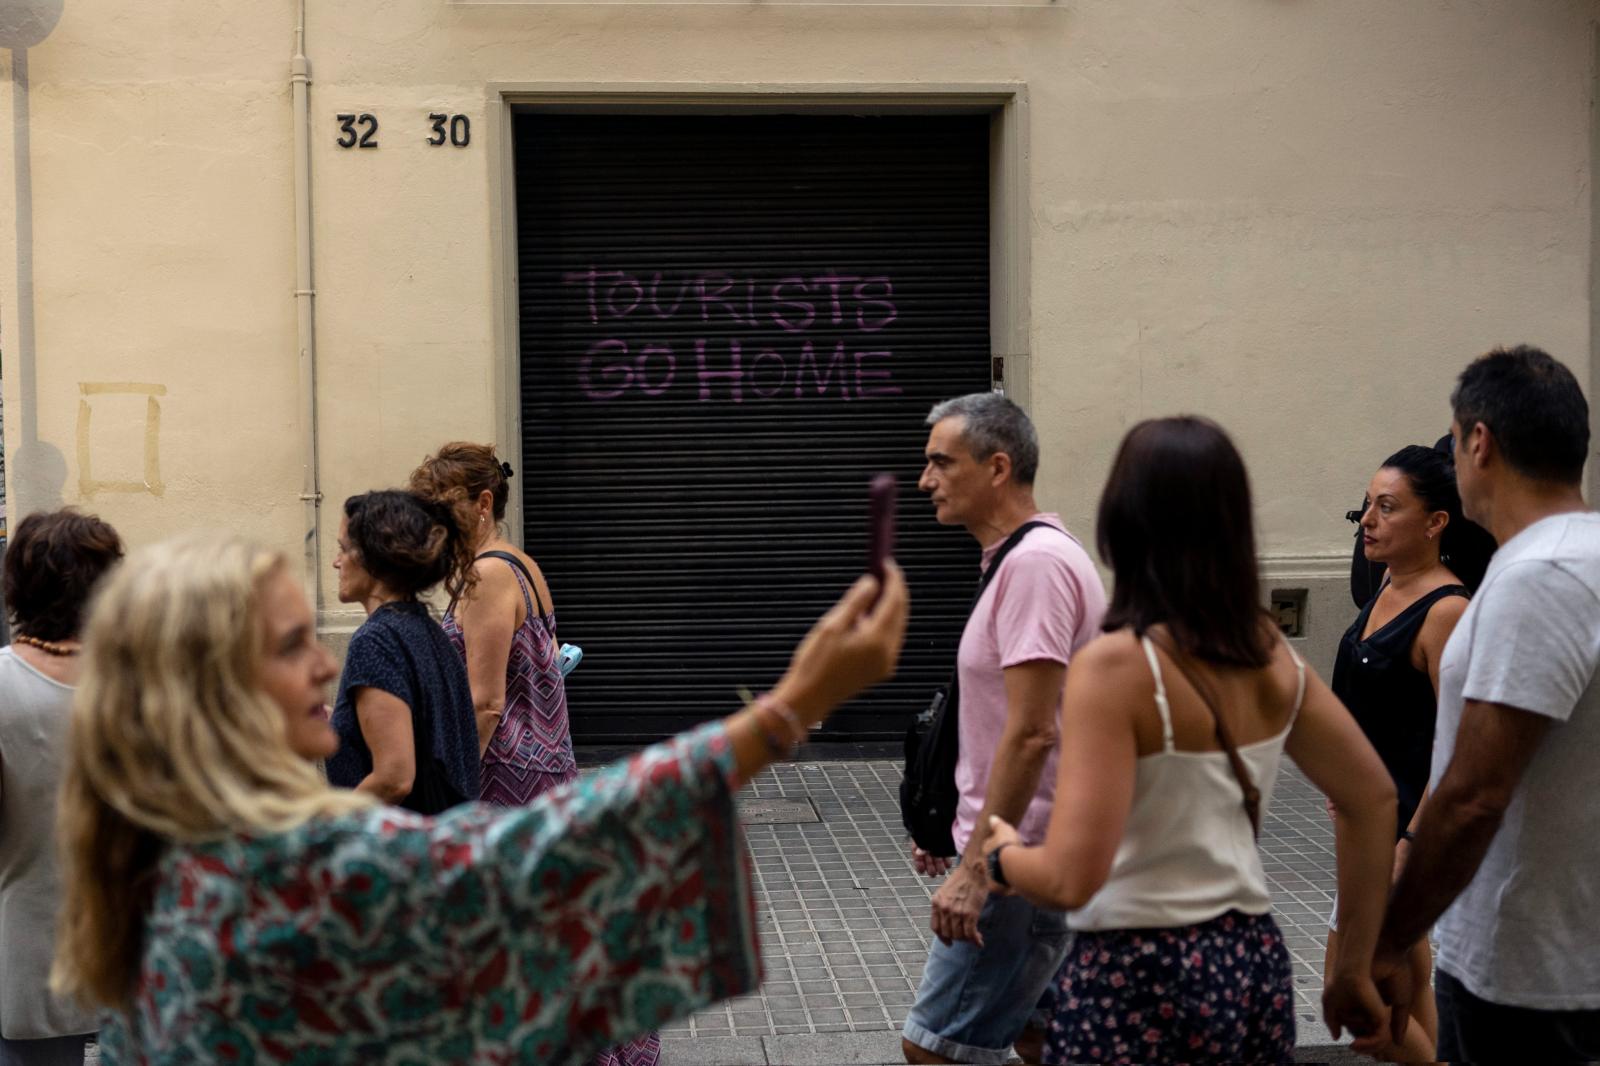 Image from Overview - People stroll by a graffiti reading "Tourists go...